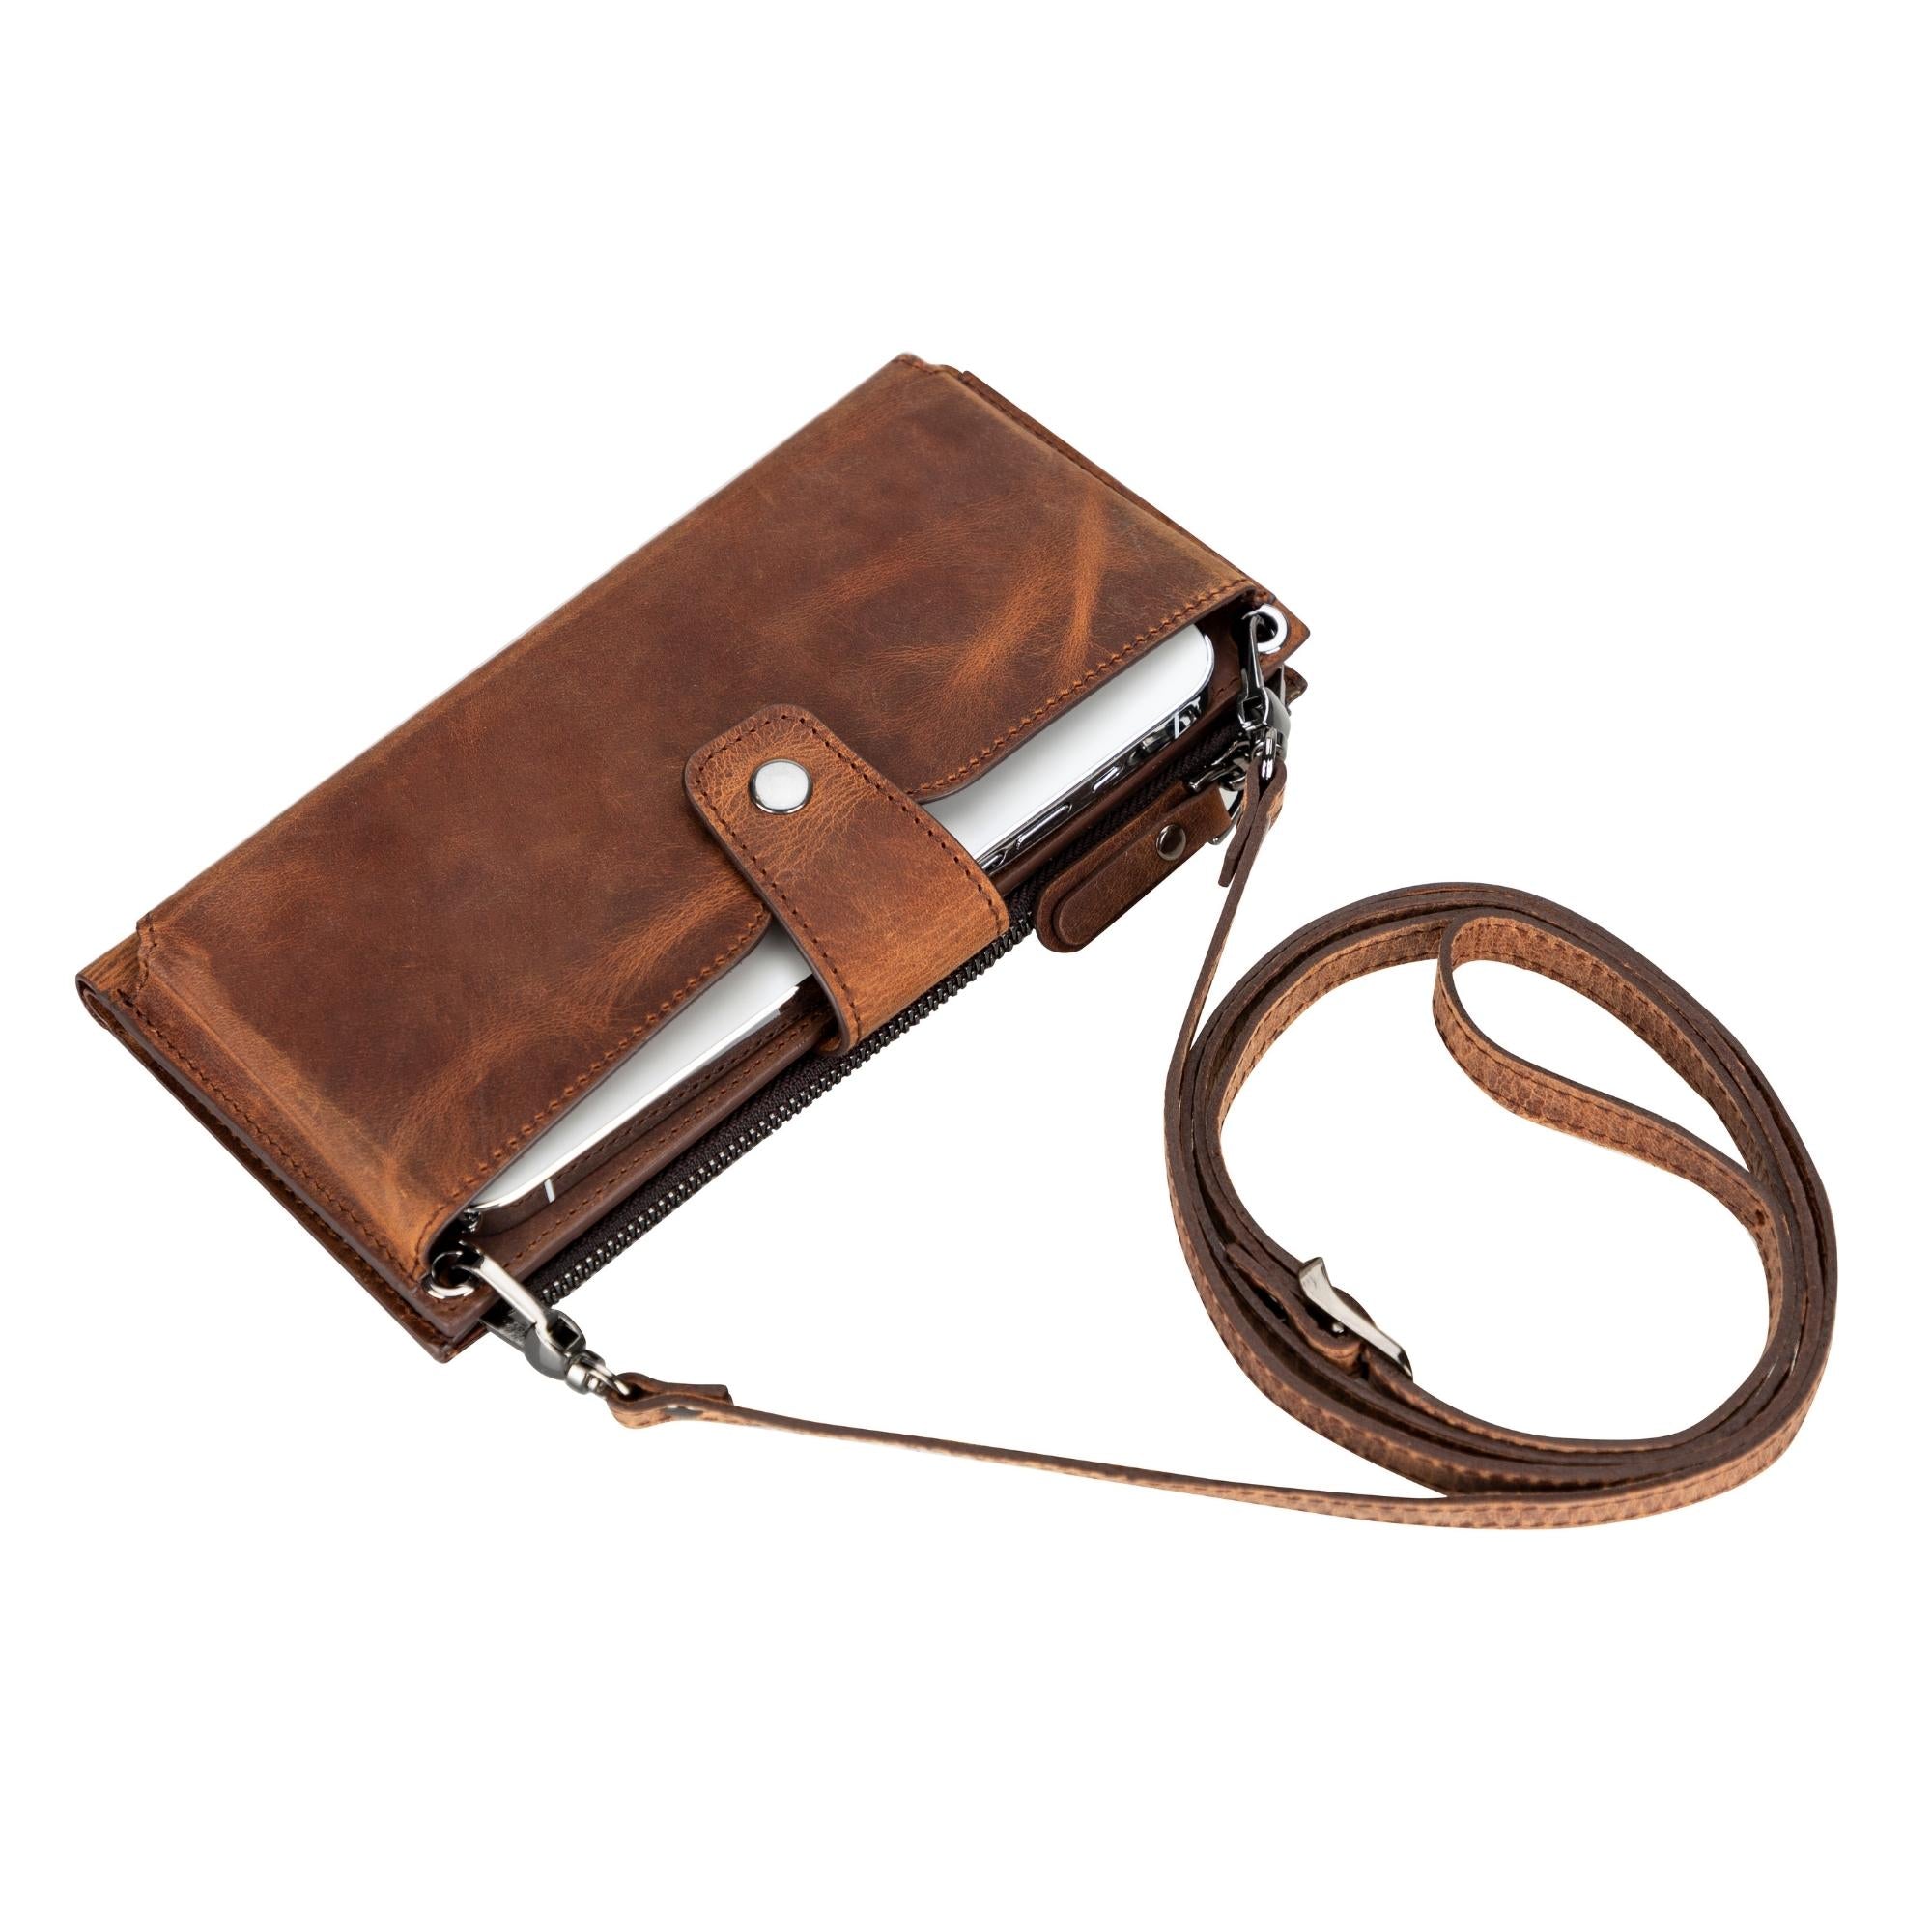 Kaycee Leather Women's Cell Phone Wallet with Strap - Antic Brown - 6.9" - TORONATA